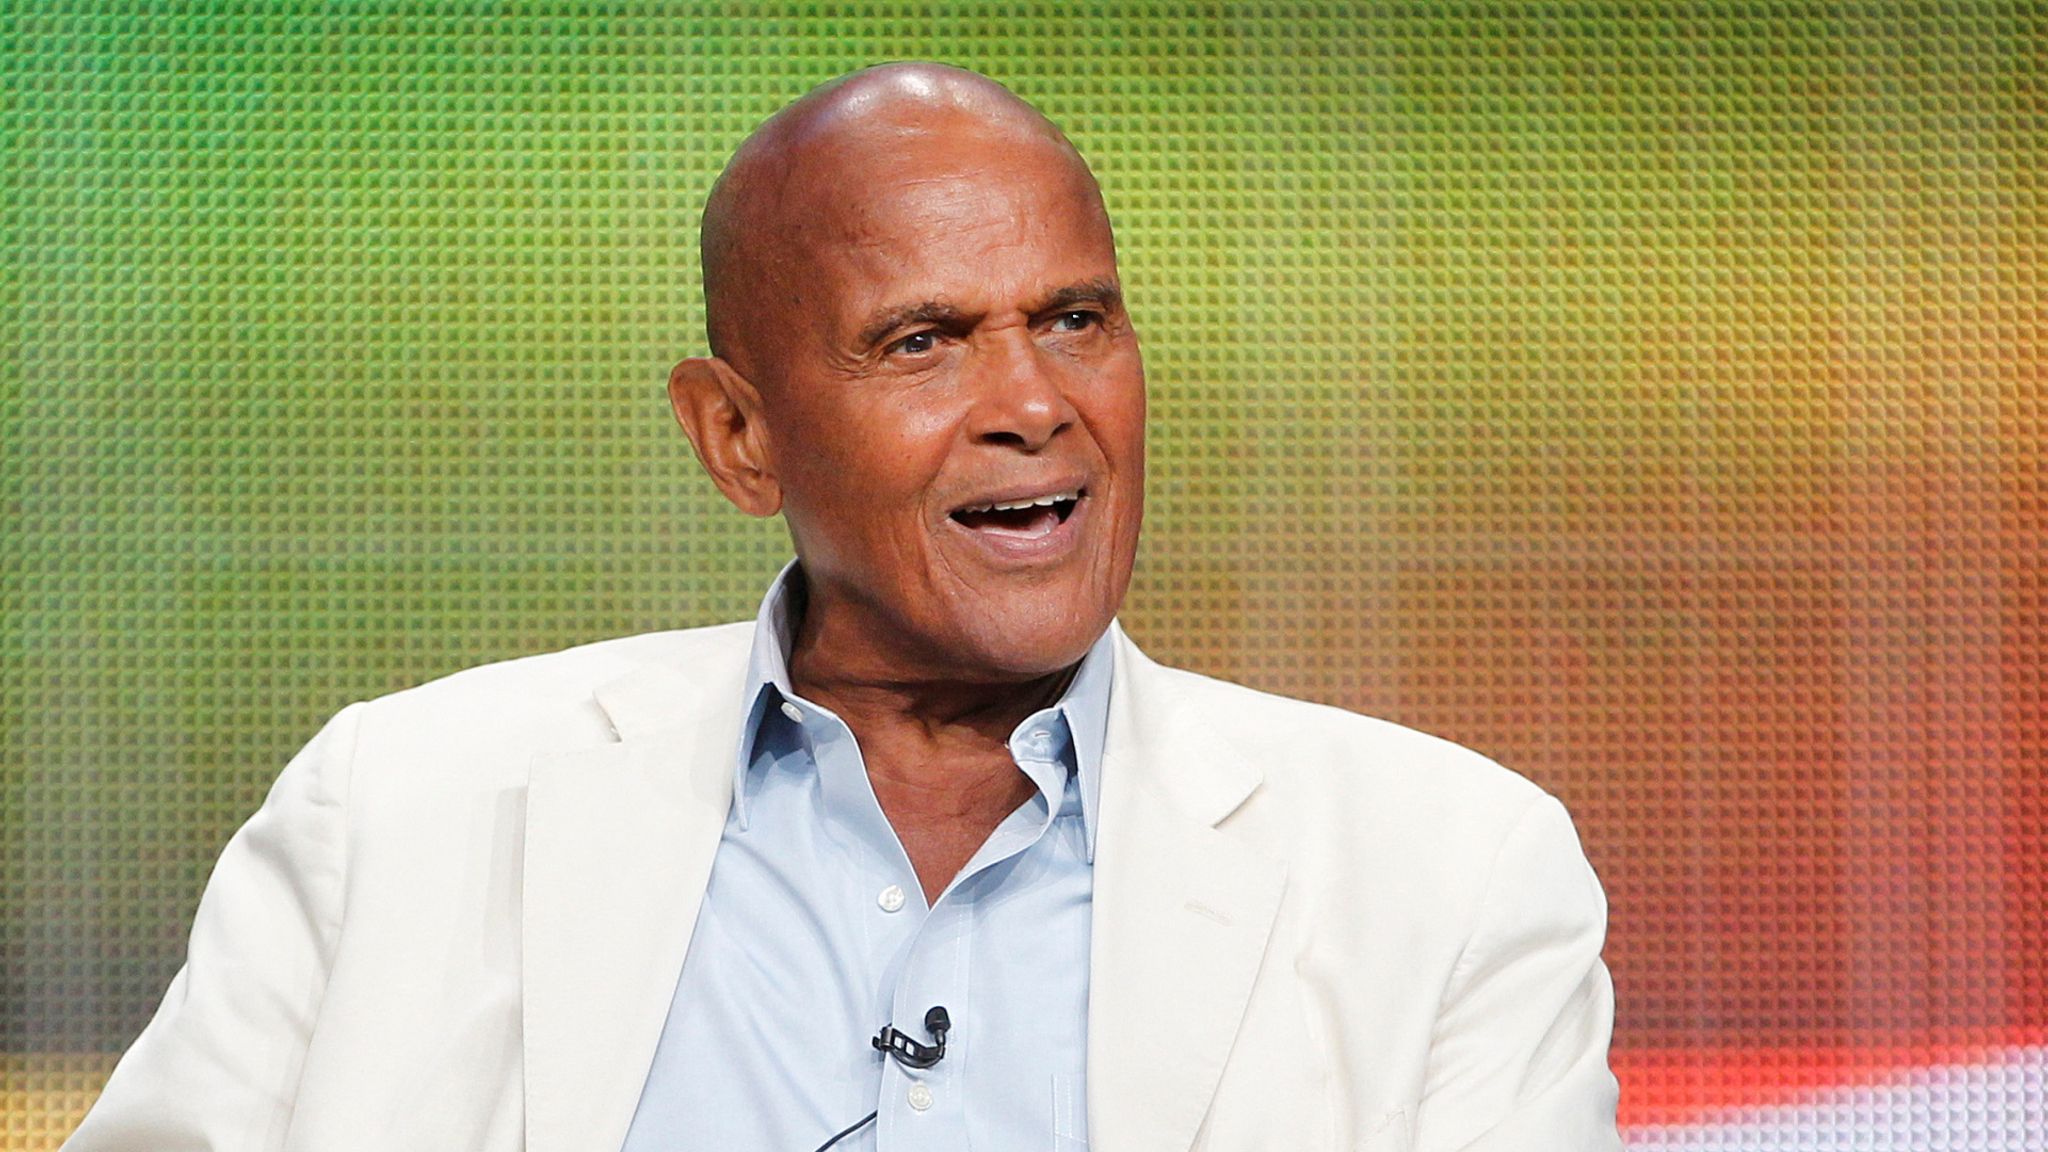 Harry Belafonte Dies At 96 - The Most Popular Jew In America